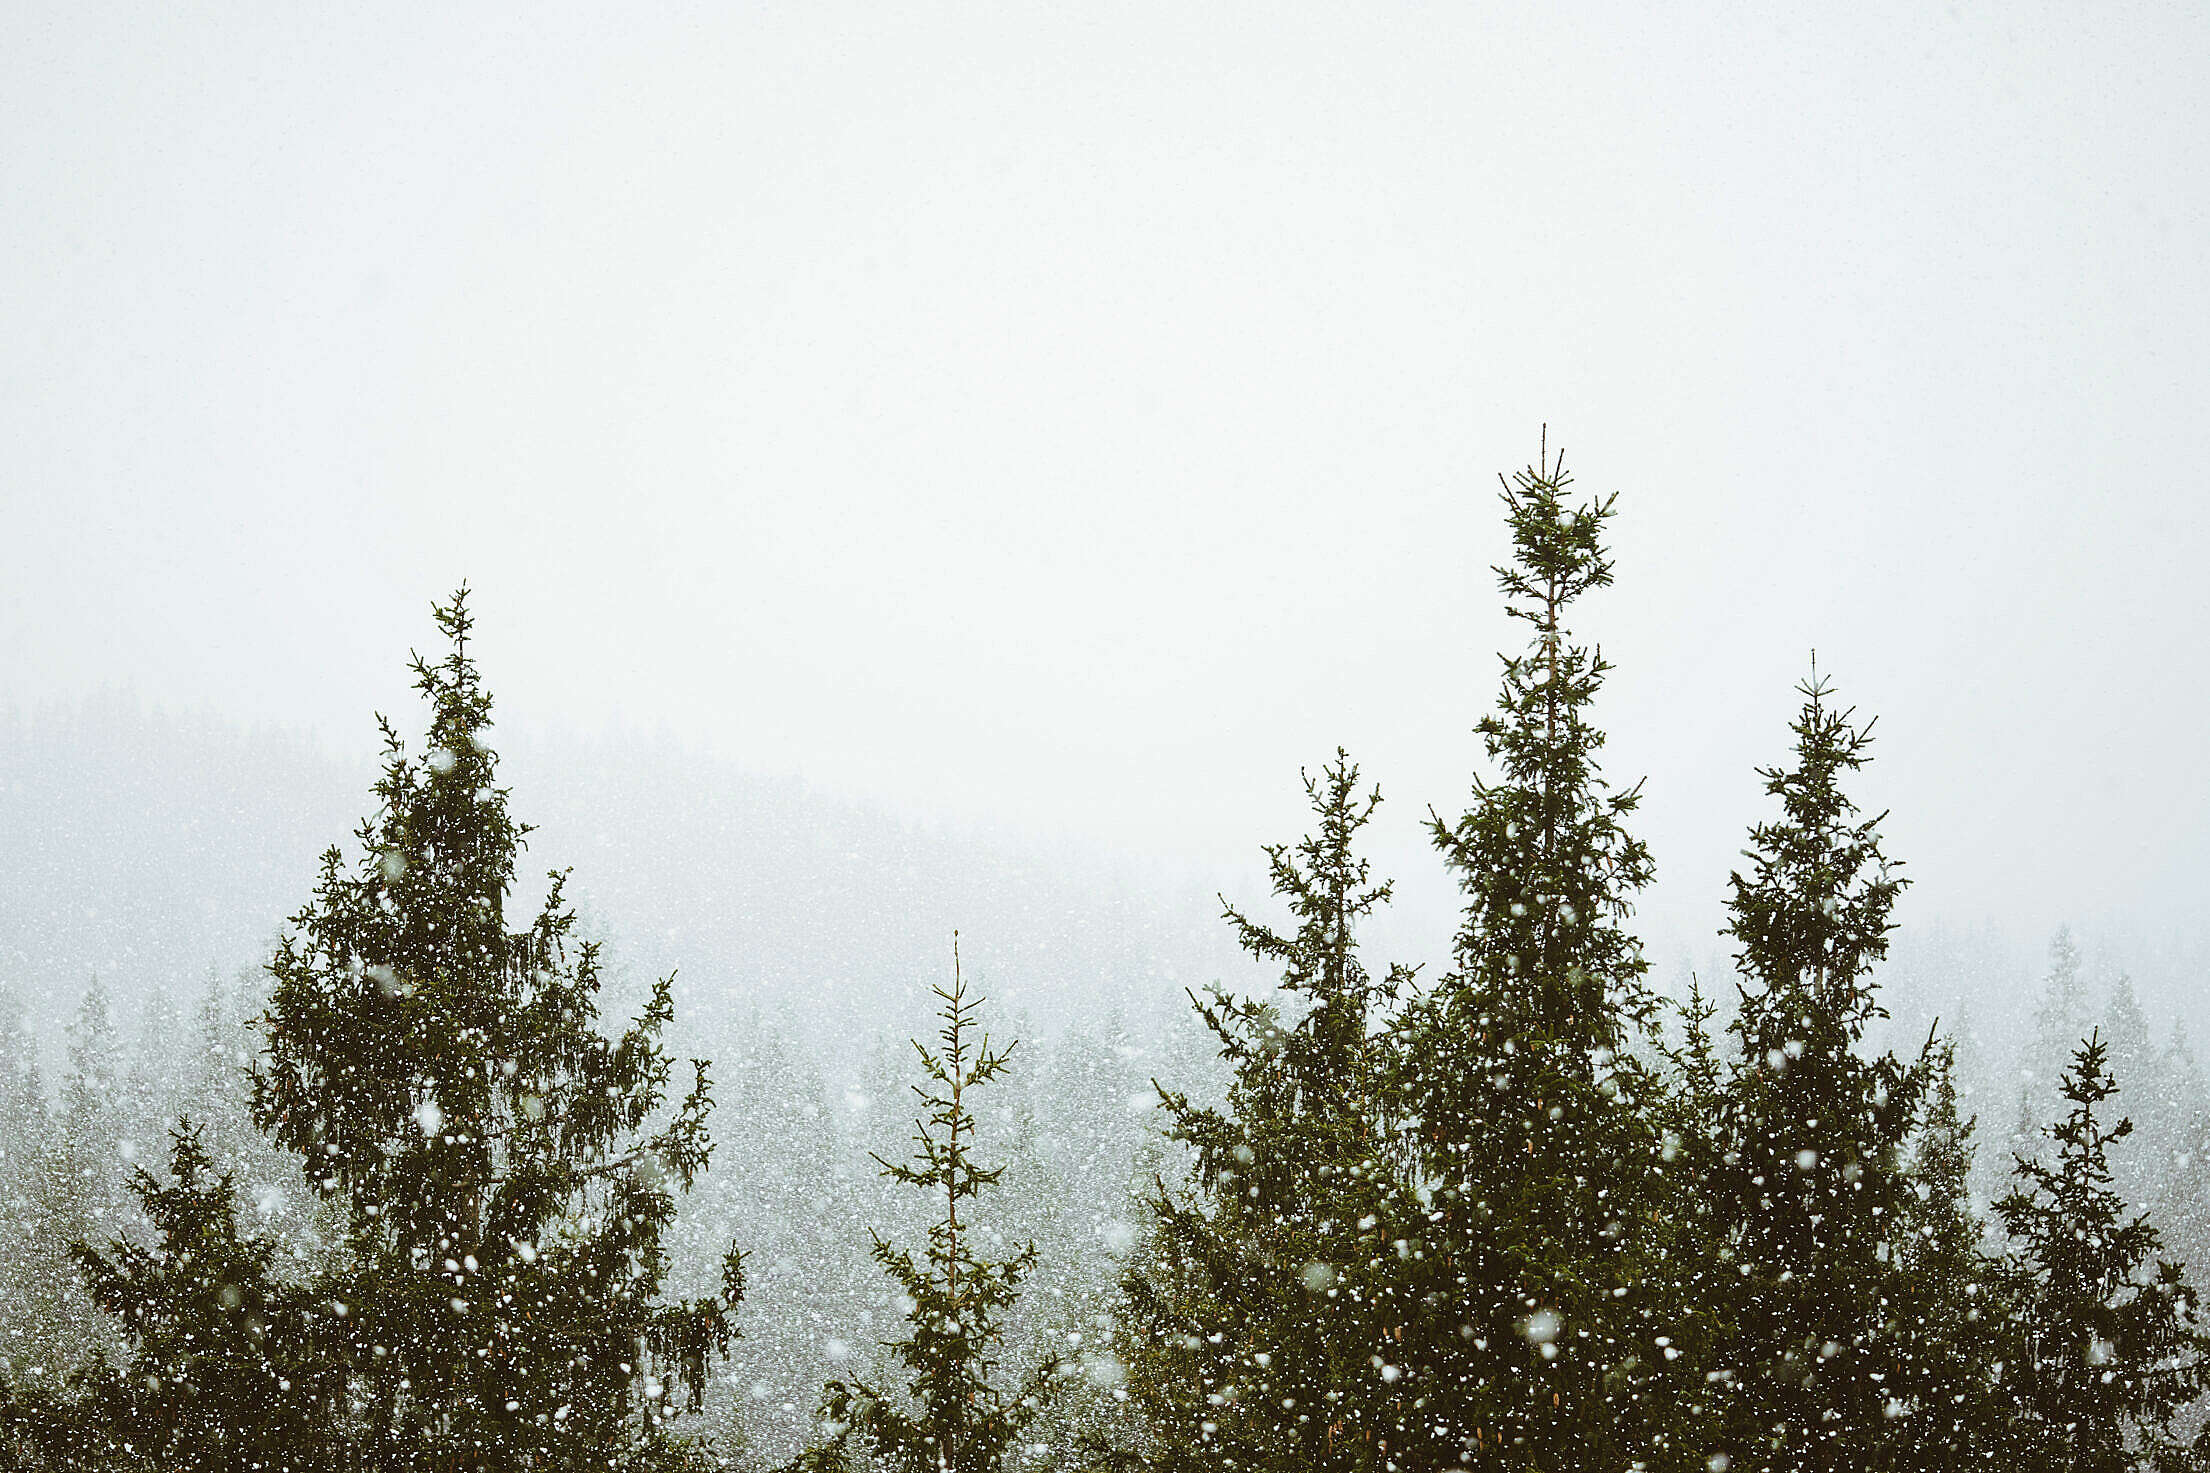 It’s Snowing in Forest Free Stock Photo